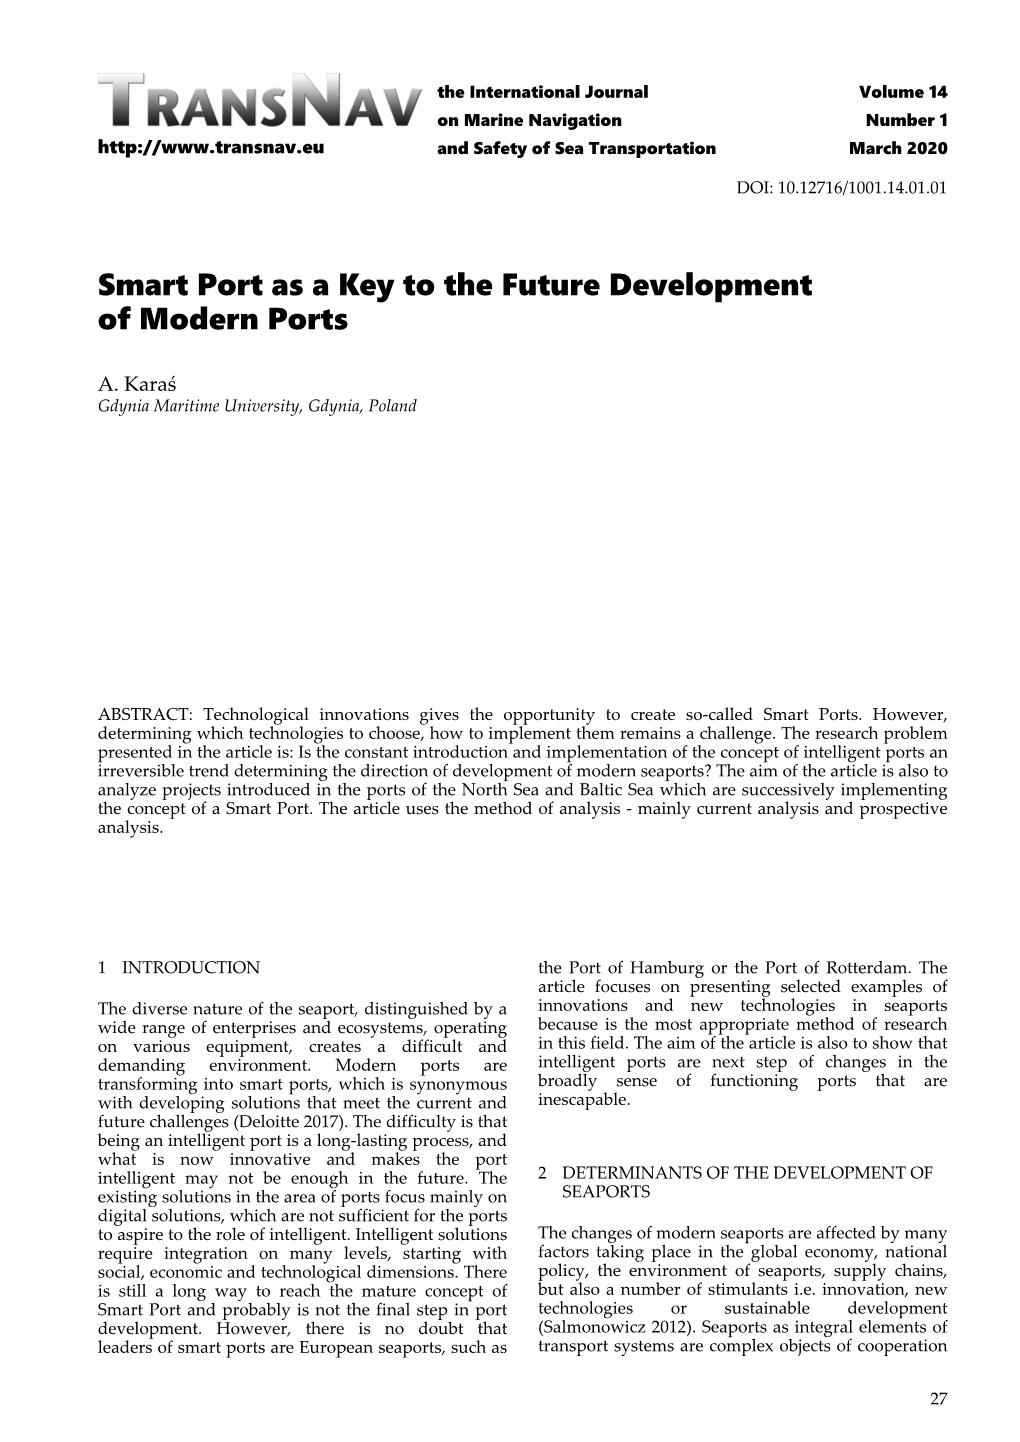 Smart Port As a Key to the Future Development of Modern Ports